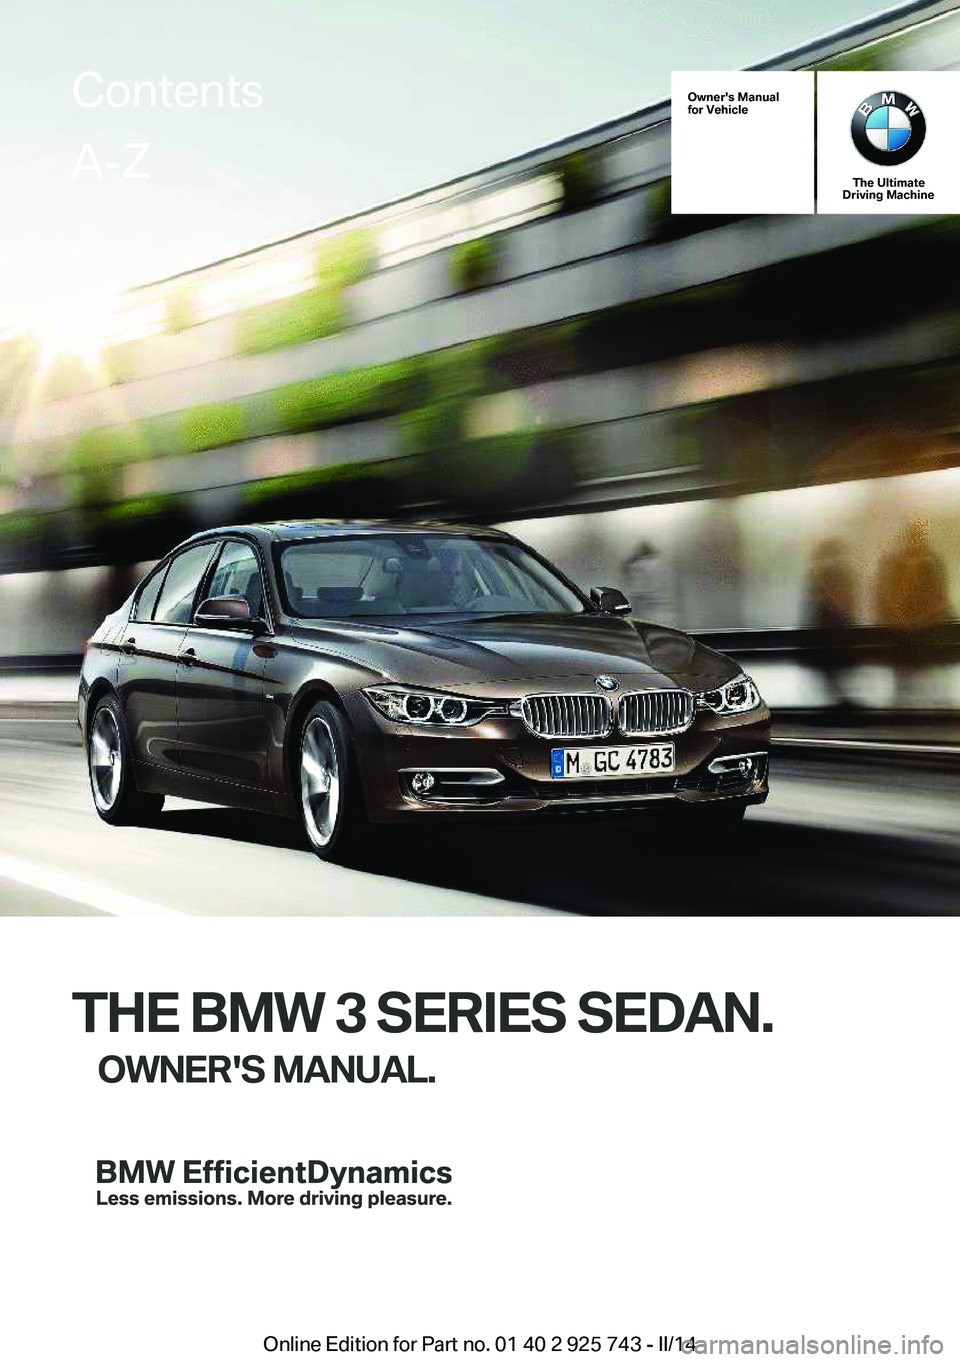 BMW 335I XDRIVE SEDAN 2014  Owners Manual Owner's Manual
for Vehicle
The Ultimate
Driving Machine
THE BMW 3 SERIES SEDAN.
OWNER'S MANUAL.
ContentsA-Z
Online Edition for Part no. 01 40 2 925 743 - II/14   